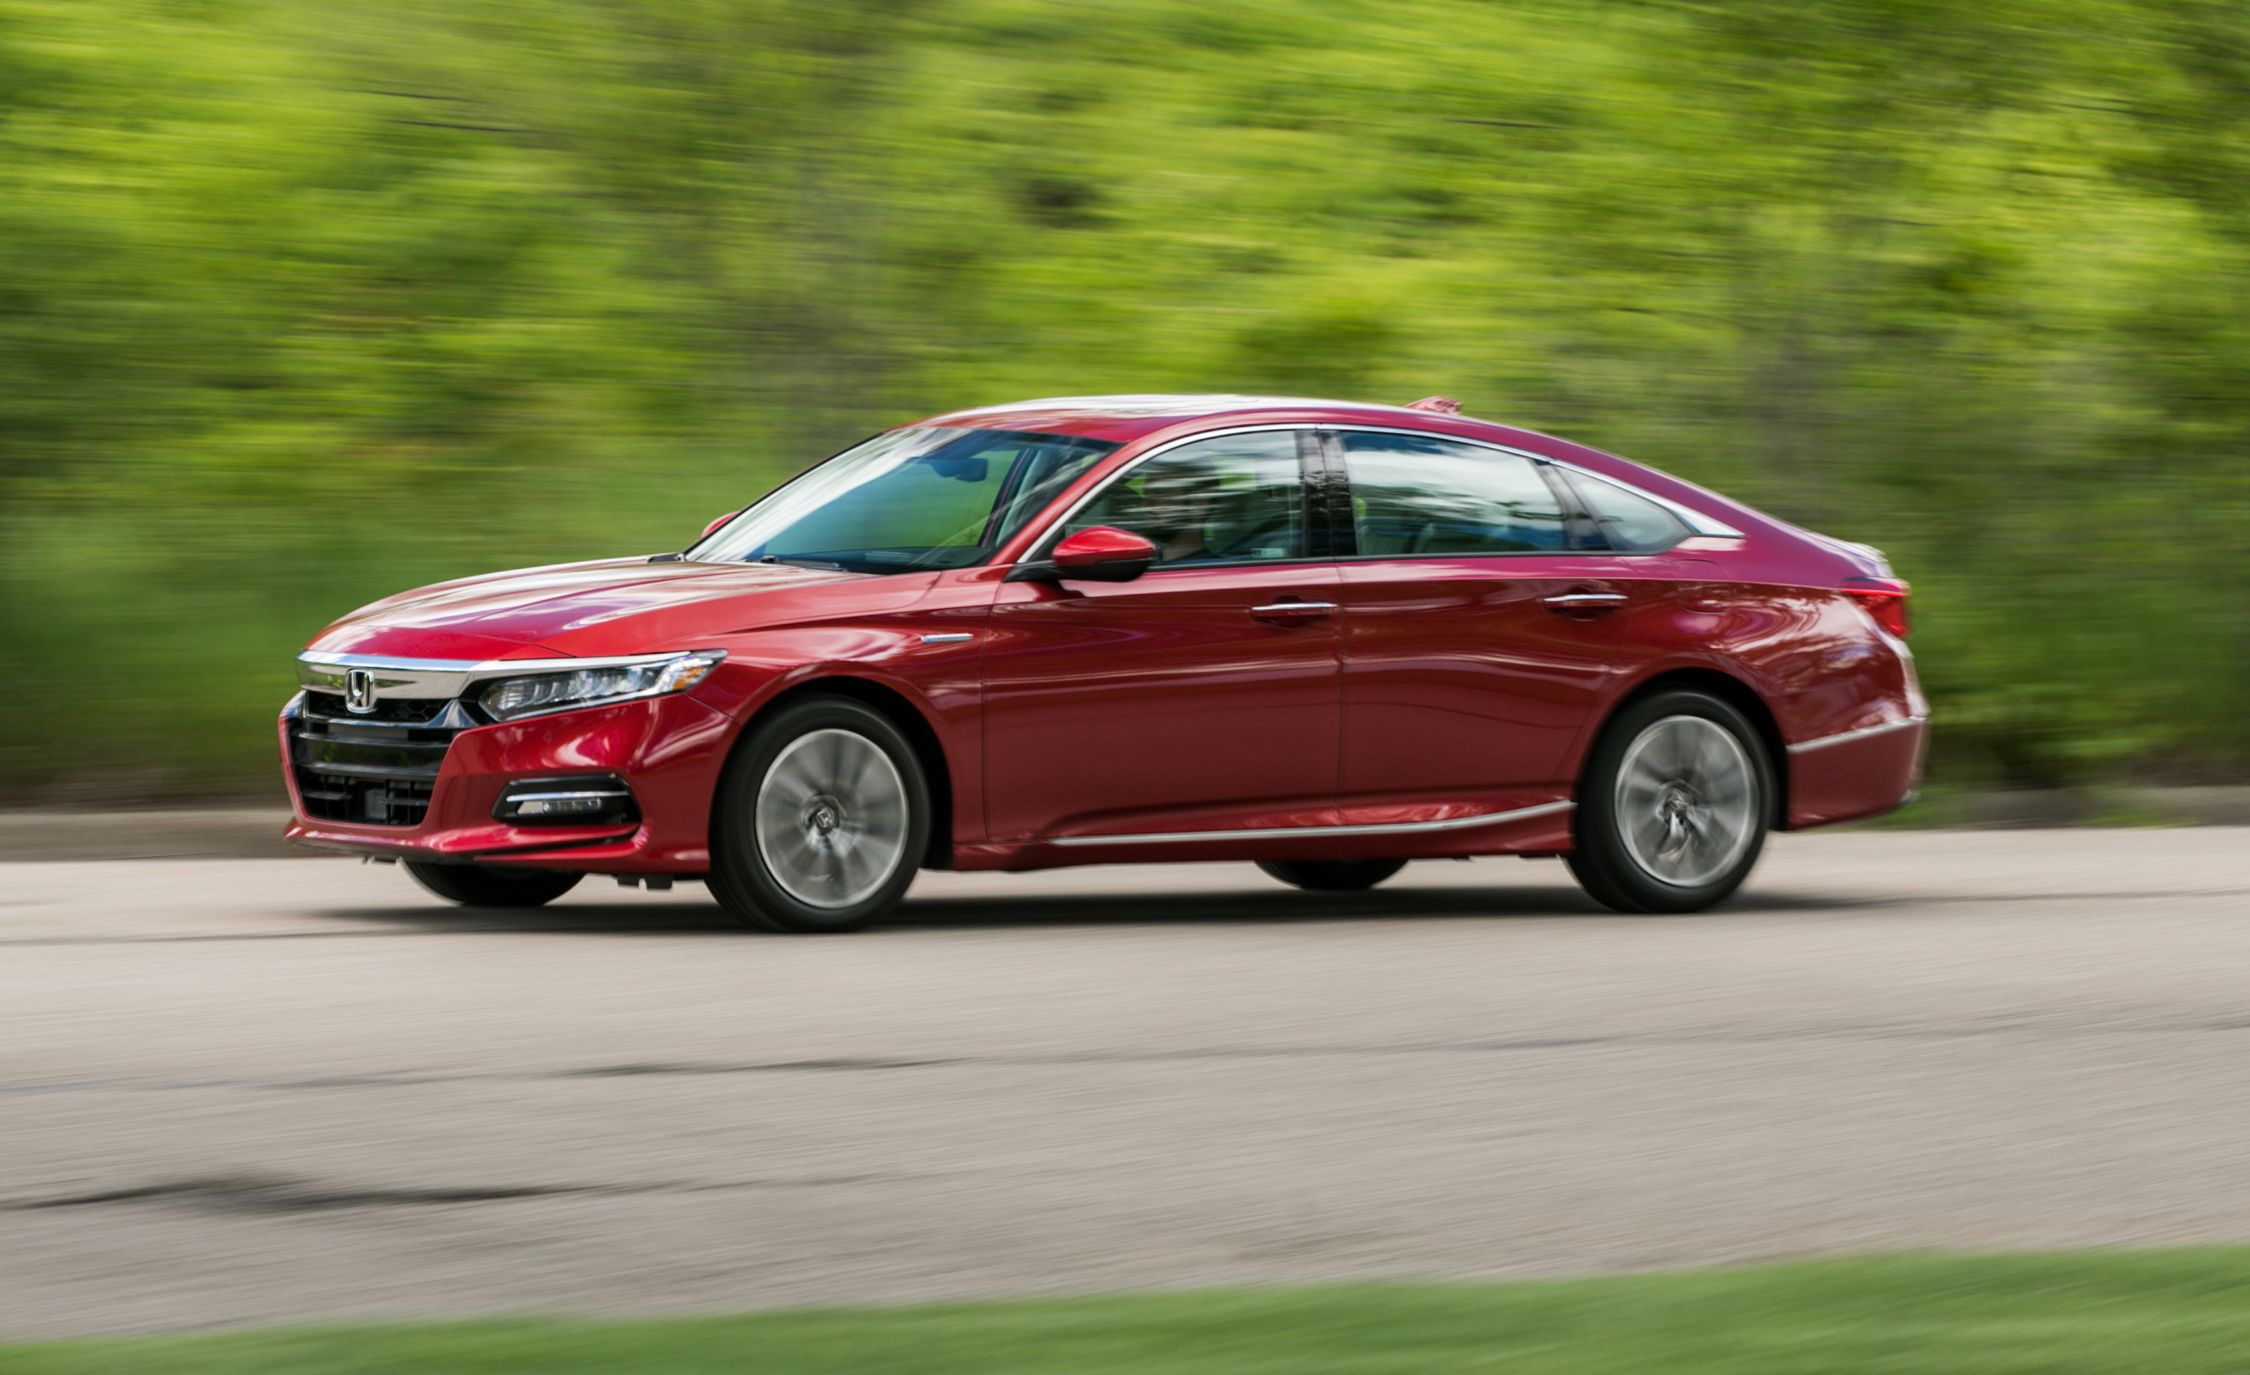 Tested: 2018 Honda Accord Hybrid is a Proven Performer